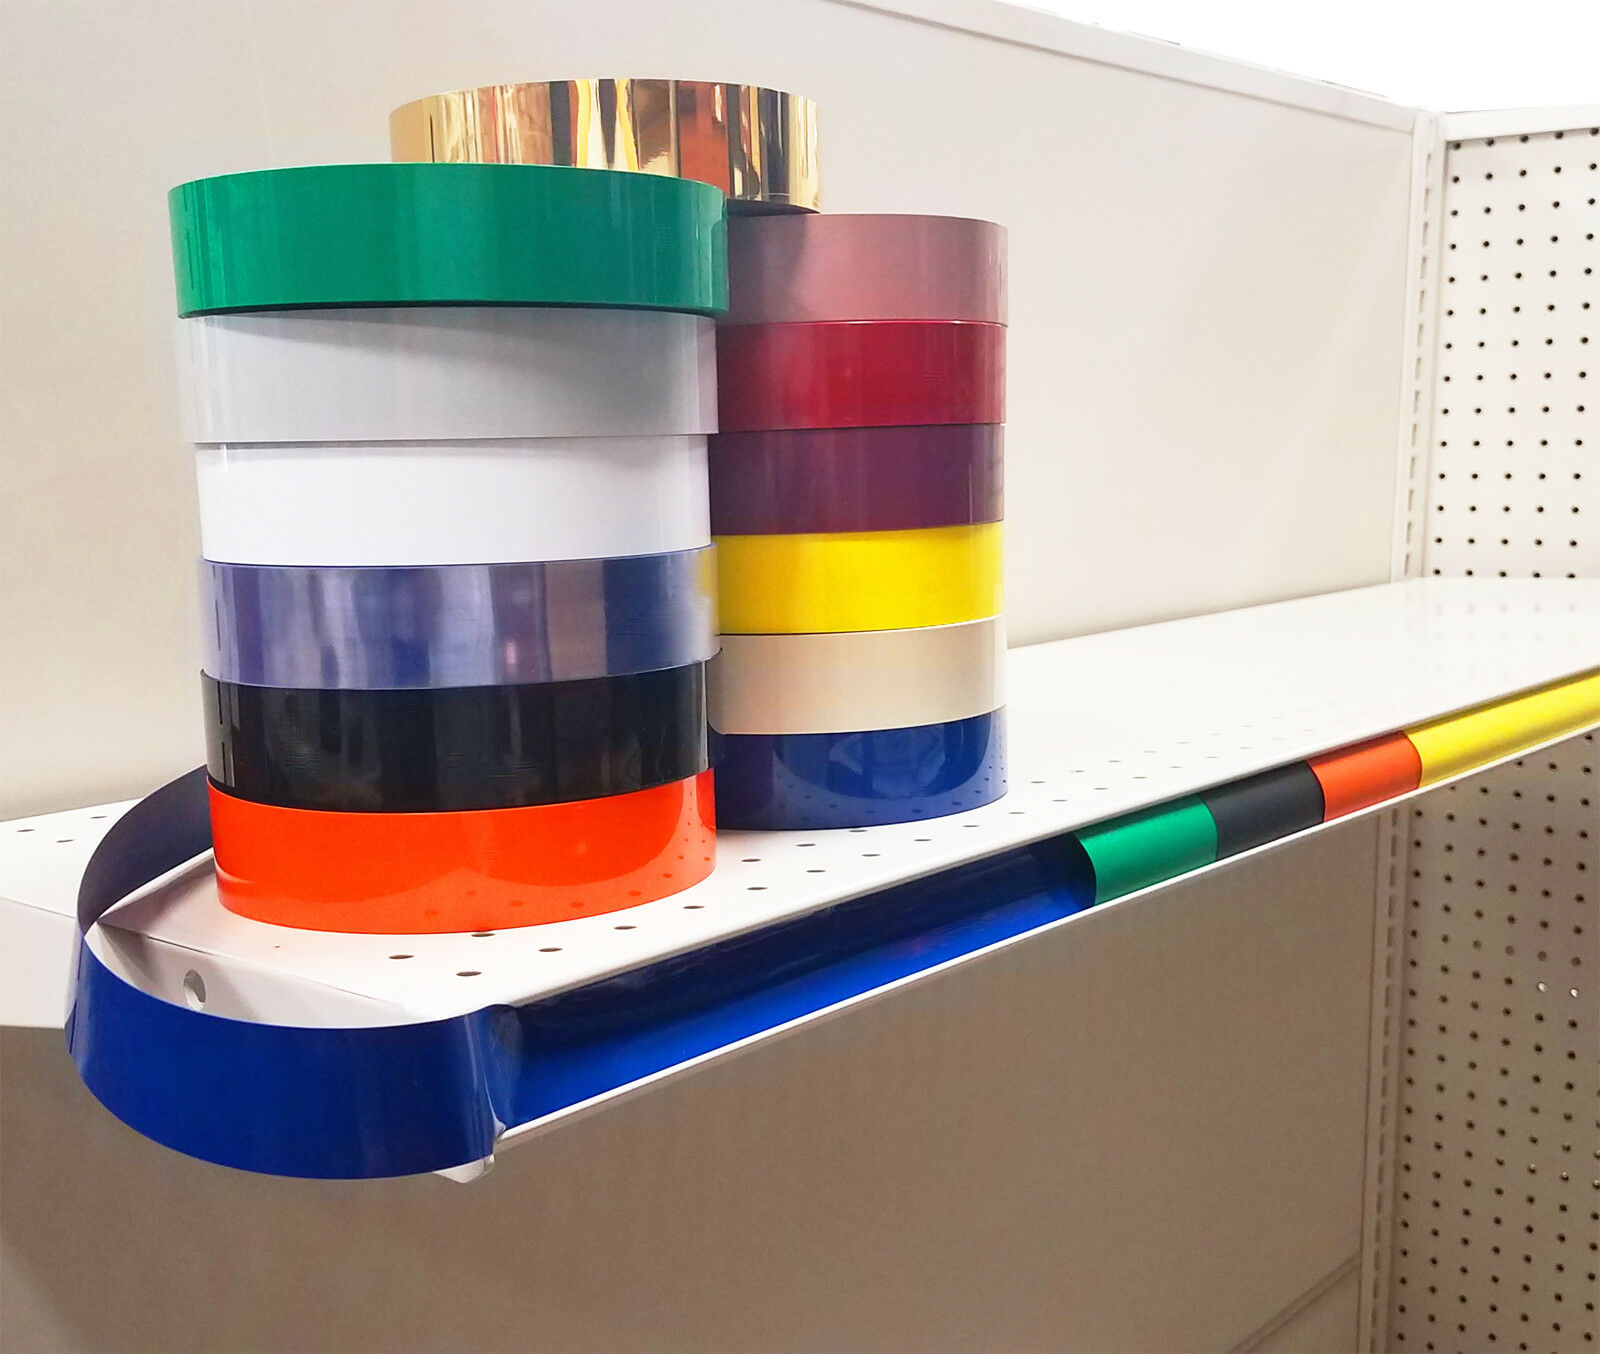 Decorative Gondola Shelving Vinyl Inserts Many Colors Available 130 Ft X 1.25 In